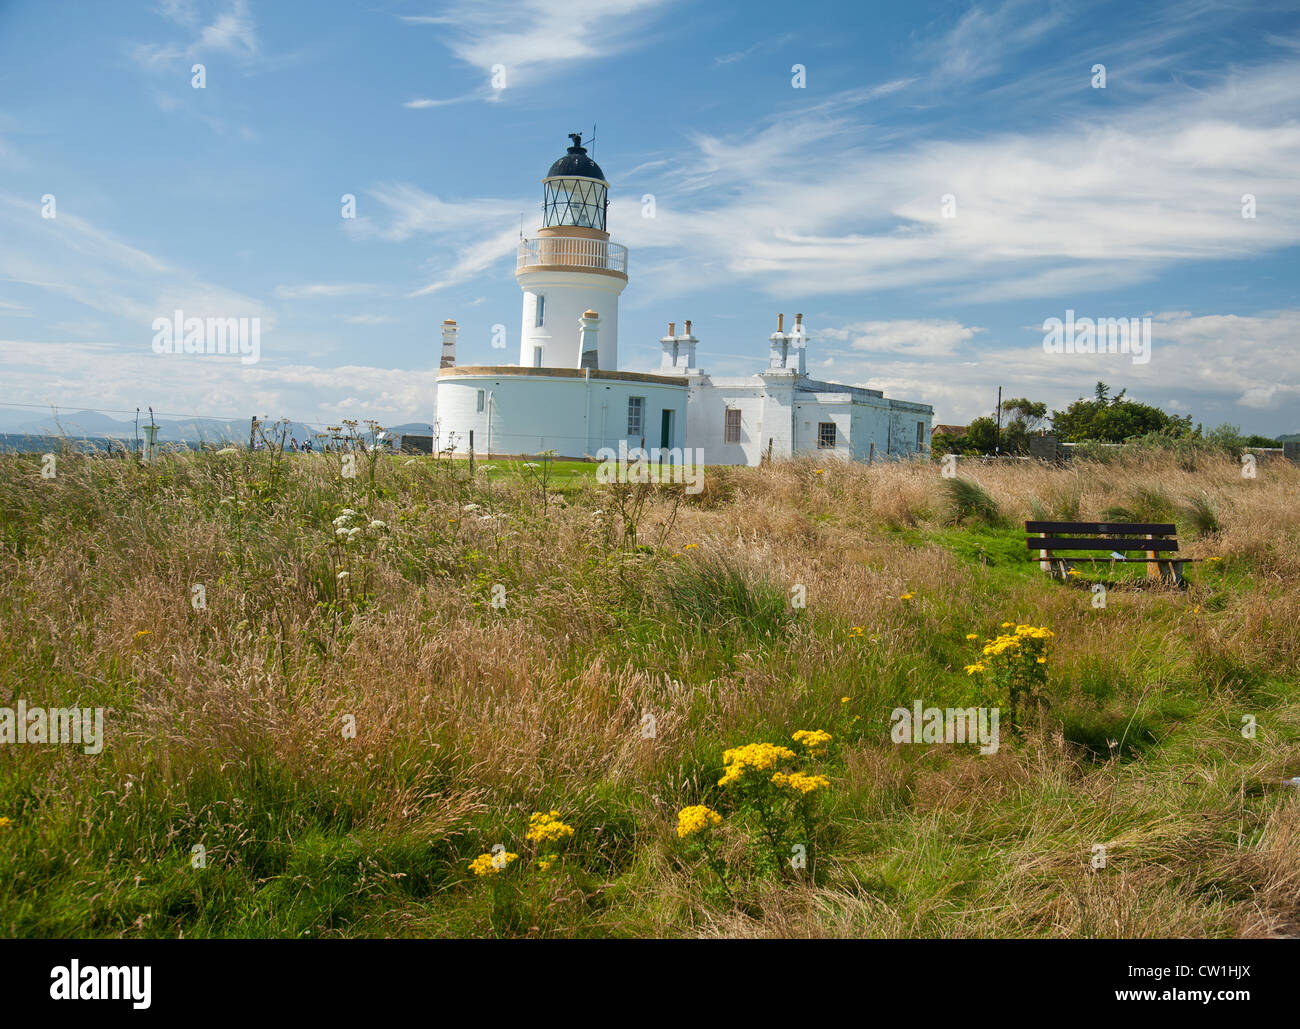 Channory Point Lighthouse, seit 1984, Moray Firth bei Fortrose in Easter Ross automatisiert.   SCO 8294 Stockfoto